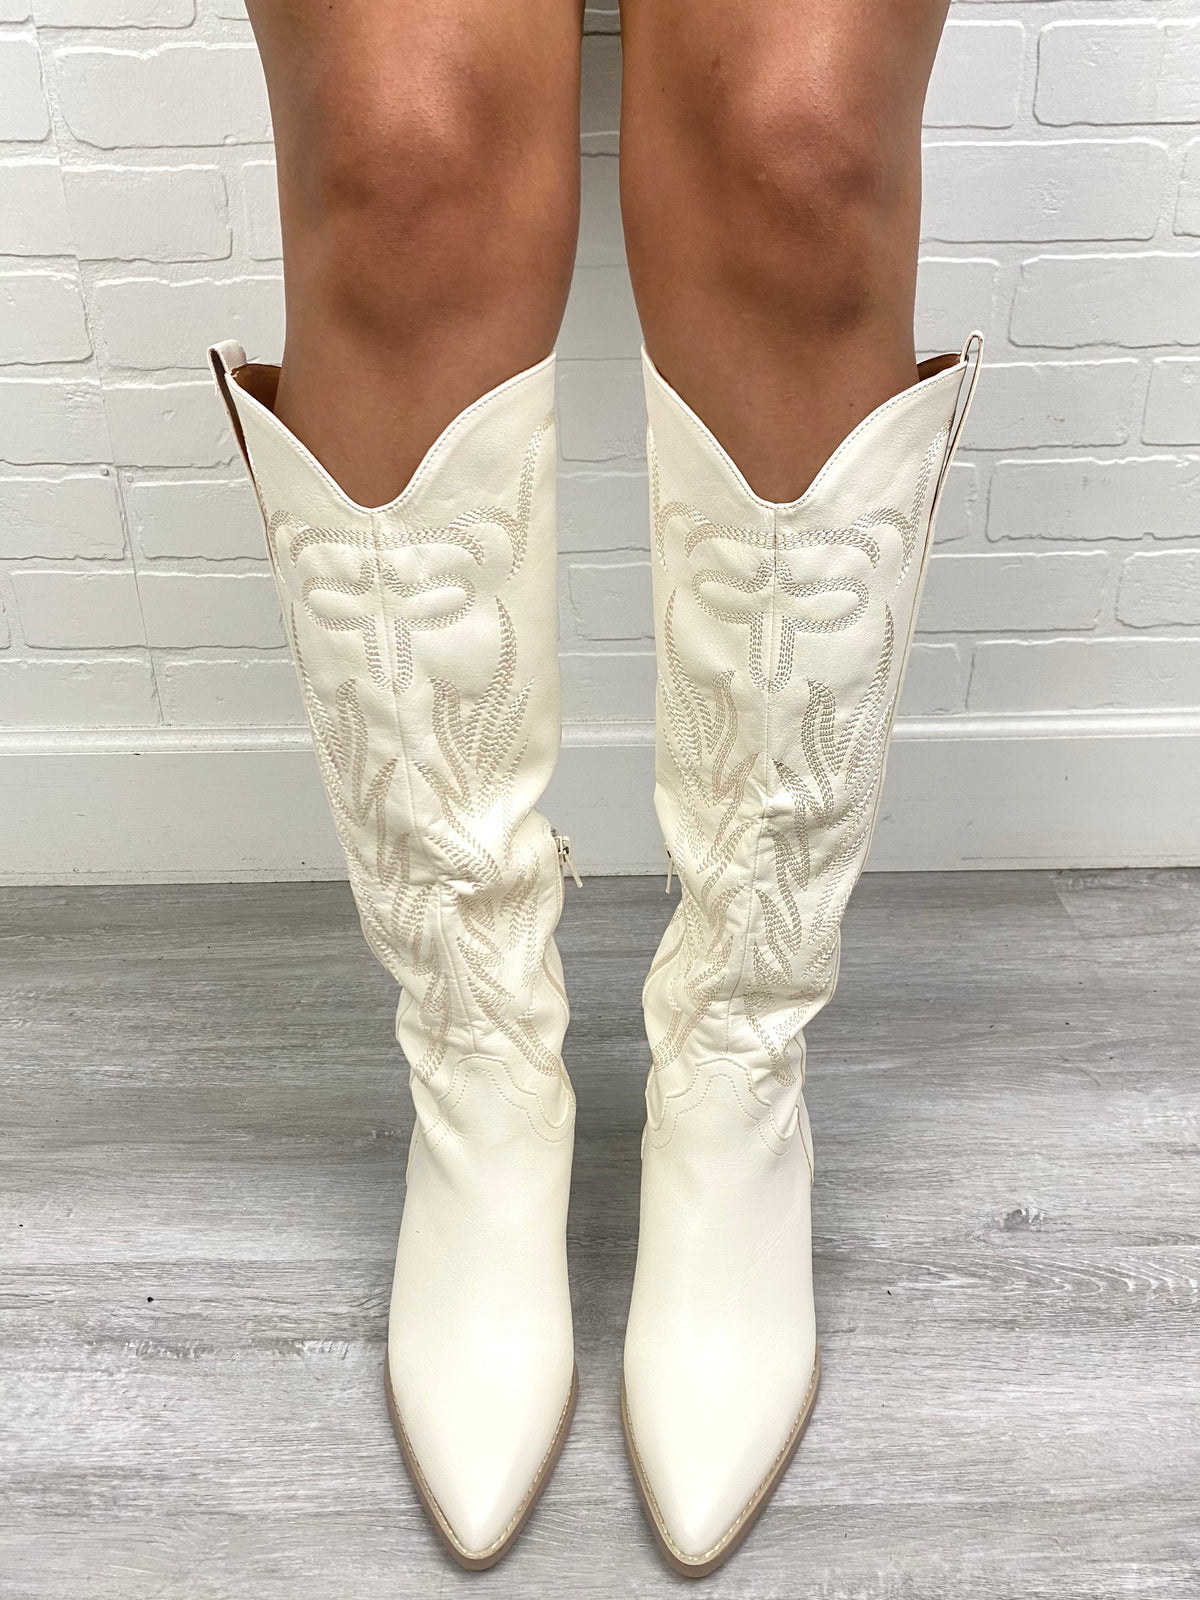 Samara cowboy boots white - Cute Shoes - Trendy Shoes at Lush Fashion Lounge Boutique in Oklahoma City